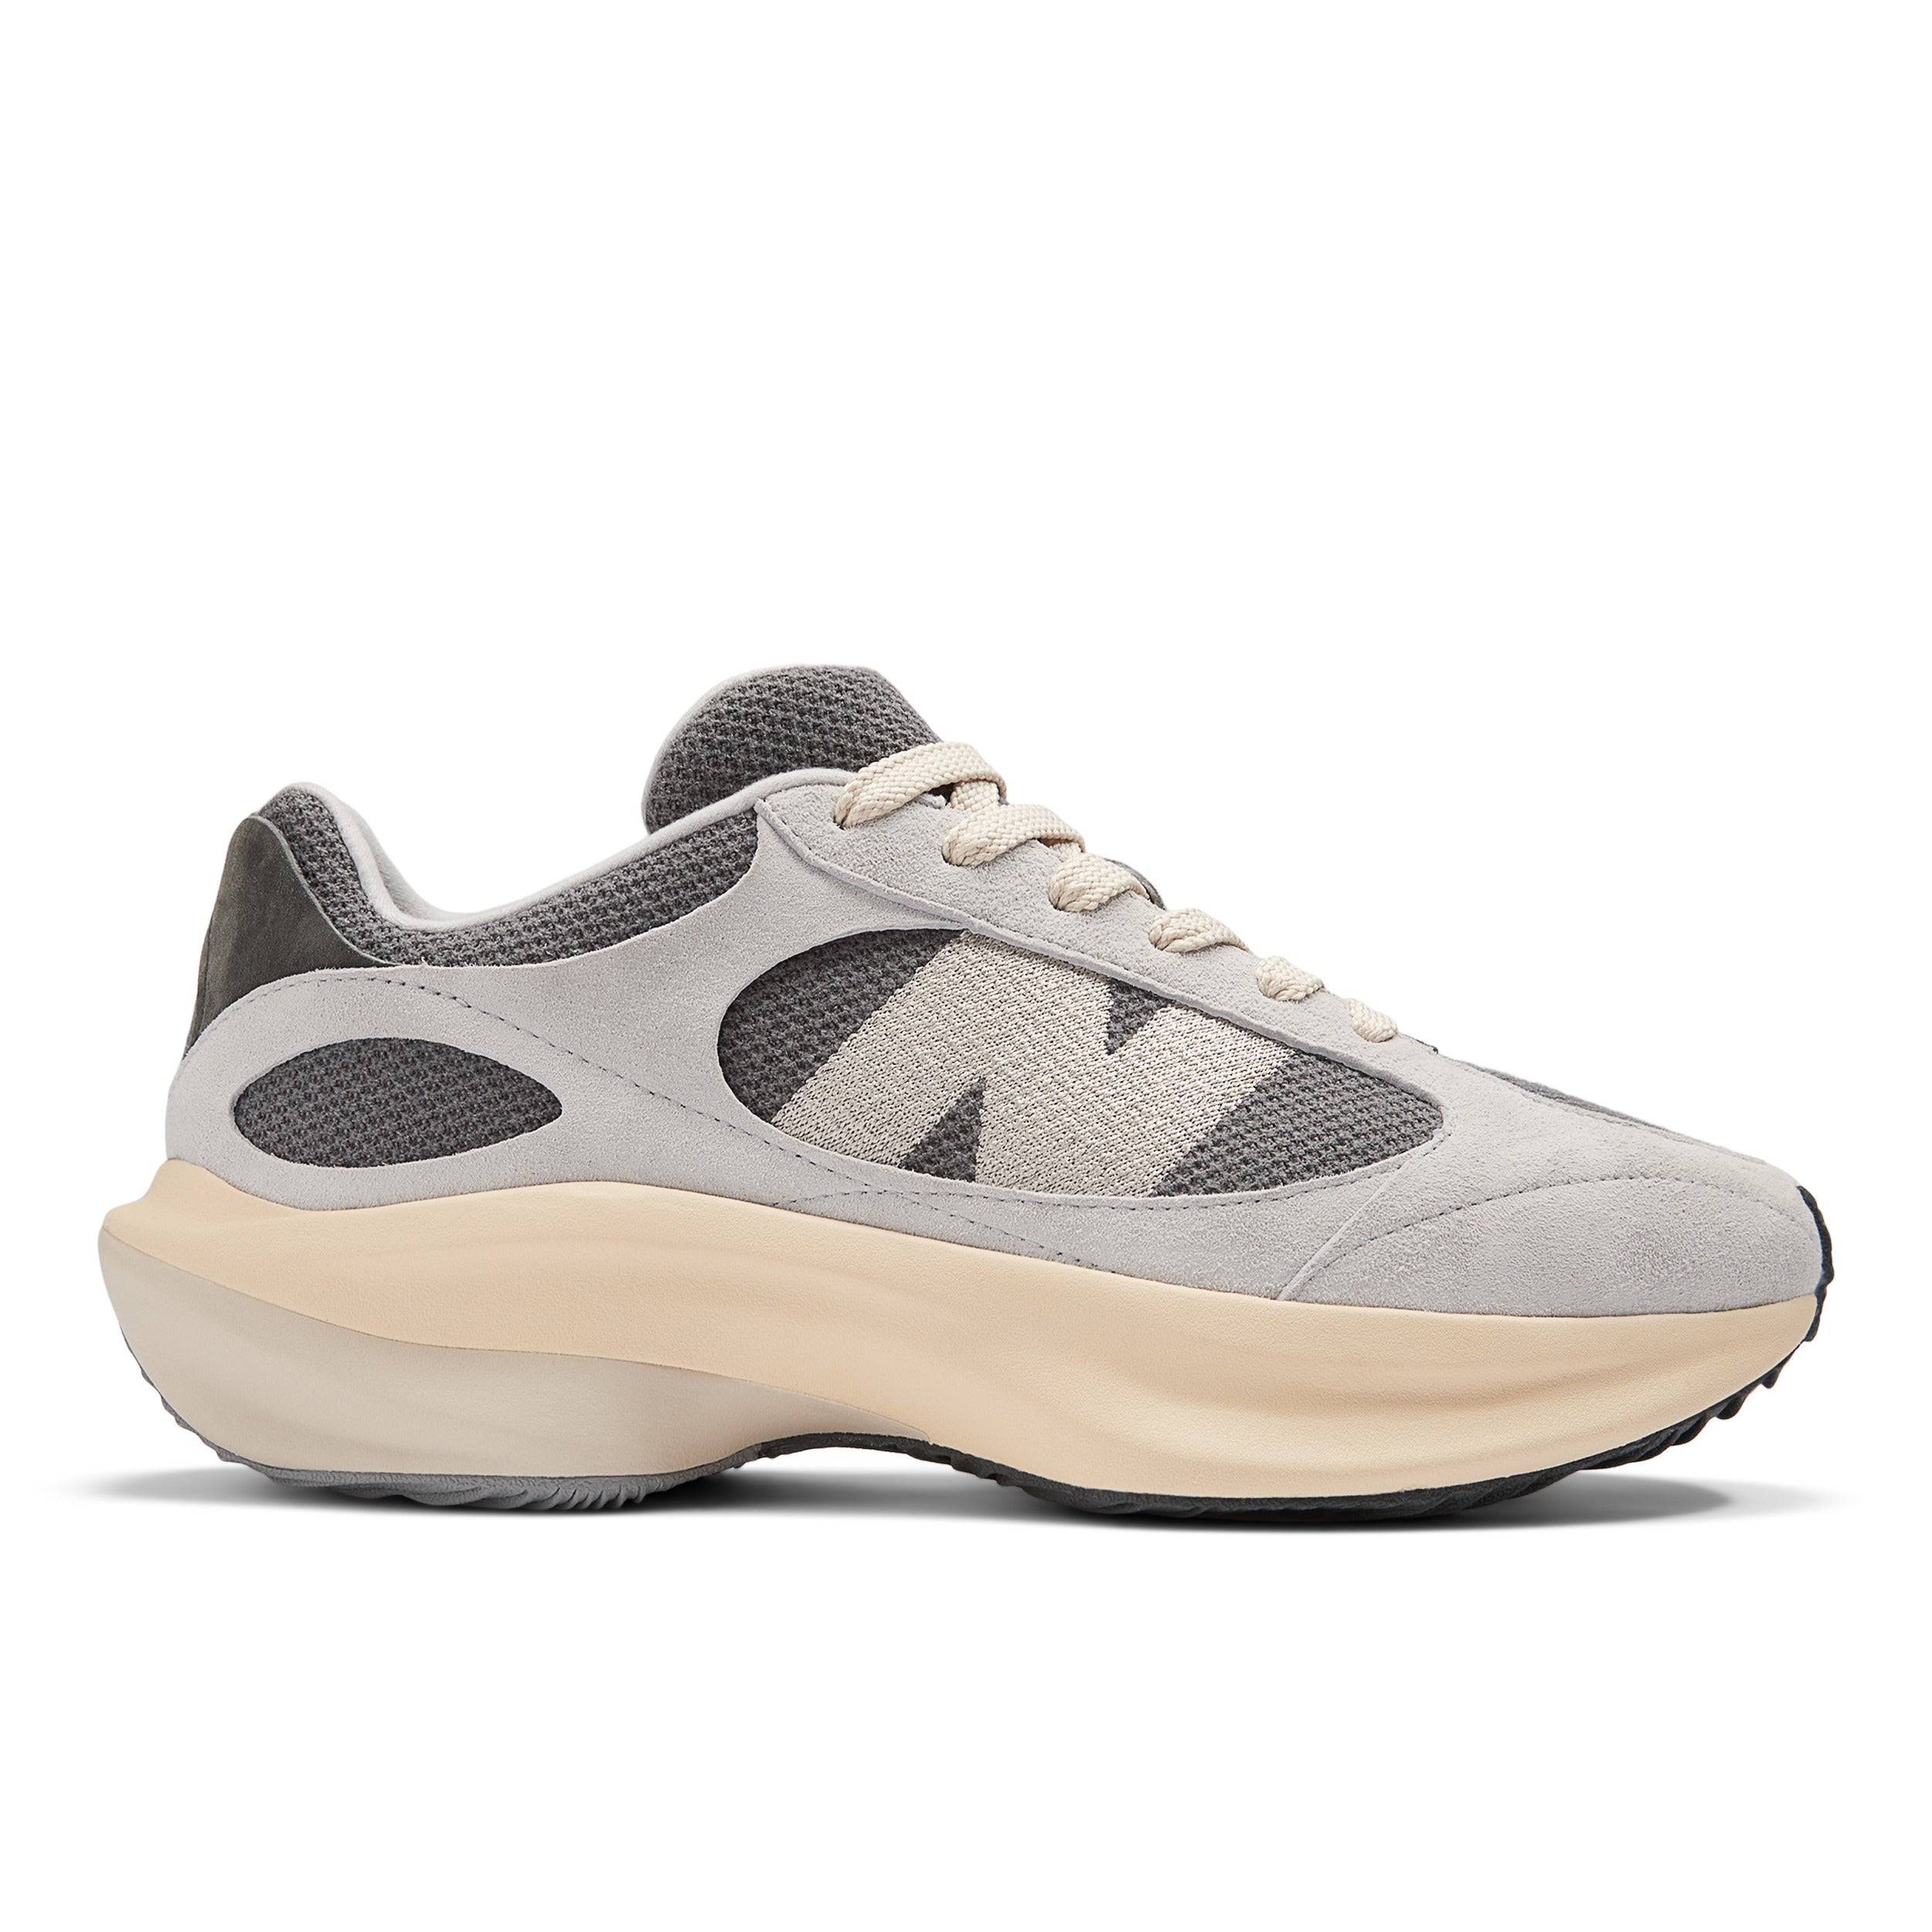 NEW BALANCE Sneakers Unisex WRPD-Grey